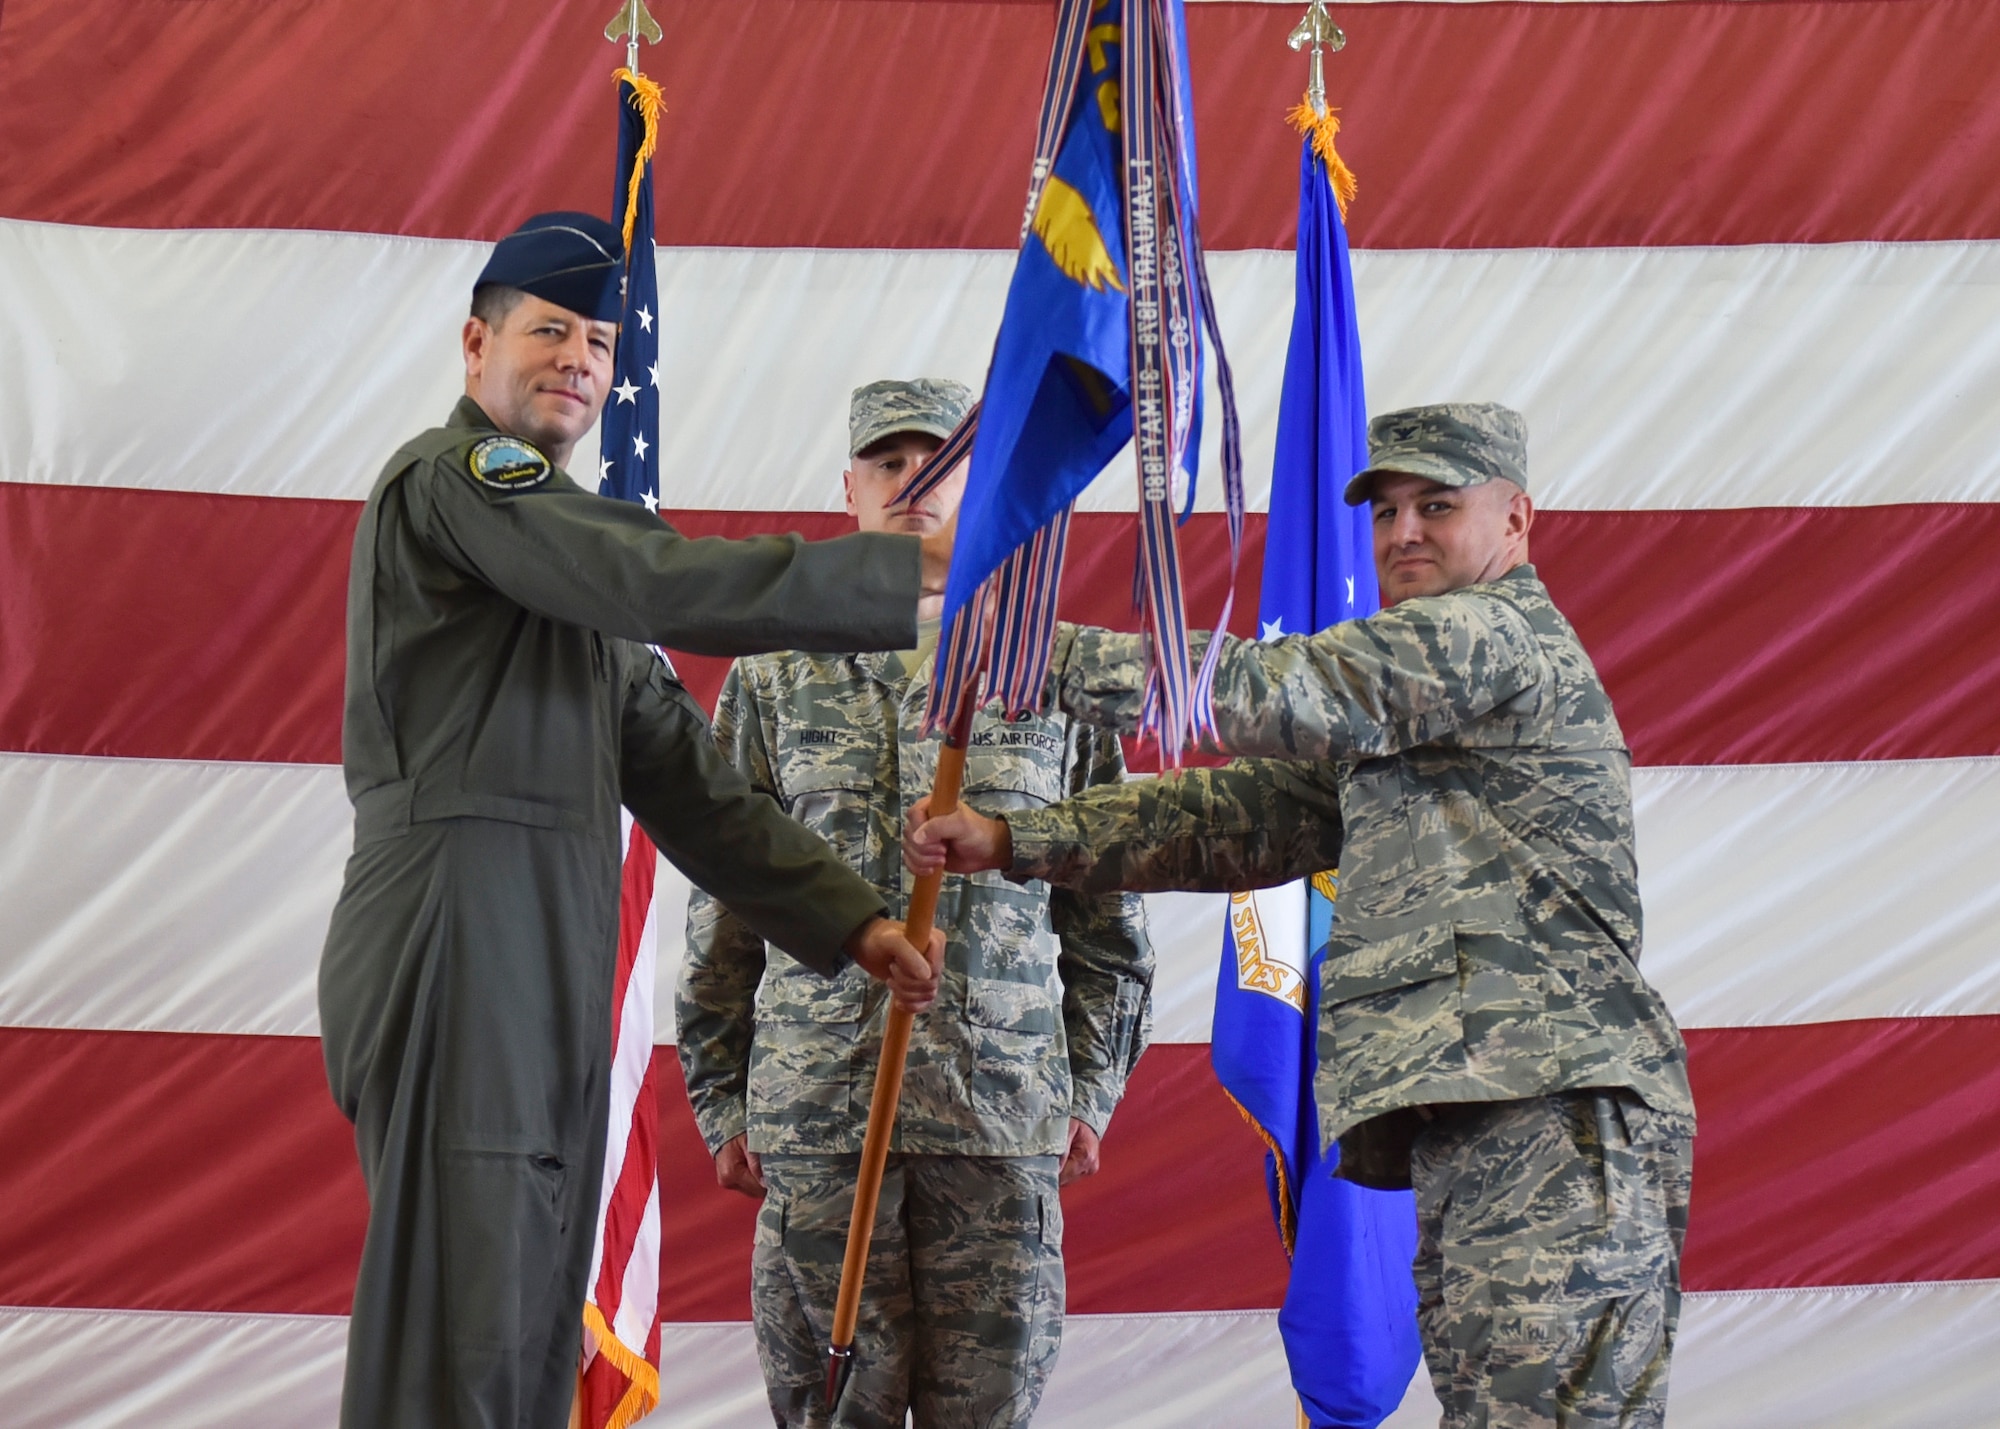 U.S. Air Force Col. Michael Hernandez, 325th Fighter Wing commander (left), presents the 325th Mission Support Group guidon to the incoming 325th MSG commander, Col. Matthew Jefson (right), during the 325th MSG Change of Command ceremony at Tyndall Air Force Base, Fla., June 30, 2017. Jefson previously served as the Deputy Director of Basing, Office of the Assistant Secretary of Defense (Energy, Installations, and Environment).The primary mission of the 325th Mission Support Group is to provide mission support and combat-ready Airmen to Team Tyndall and worldwide expeditionary forces. These support services and activities include civil engineering, security, communications, personnel, services, contracting, supply, and transportation support, for 23,000 active duty, civilian, dependent, and retired personnel. (U.S. Air Force photo by Senior Airman Dustin Mullen/Released)